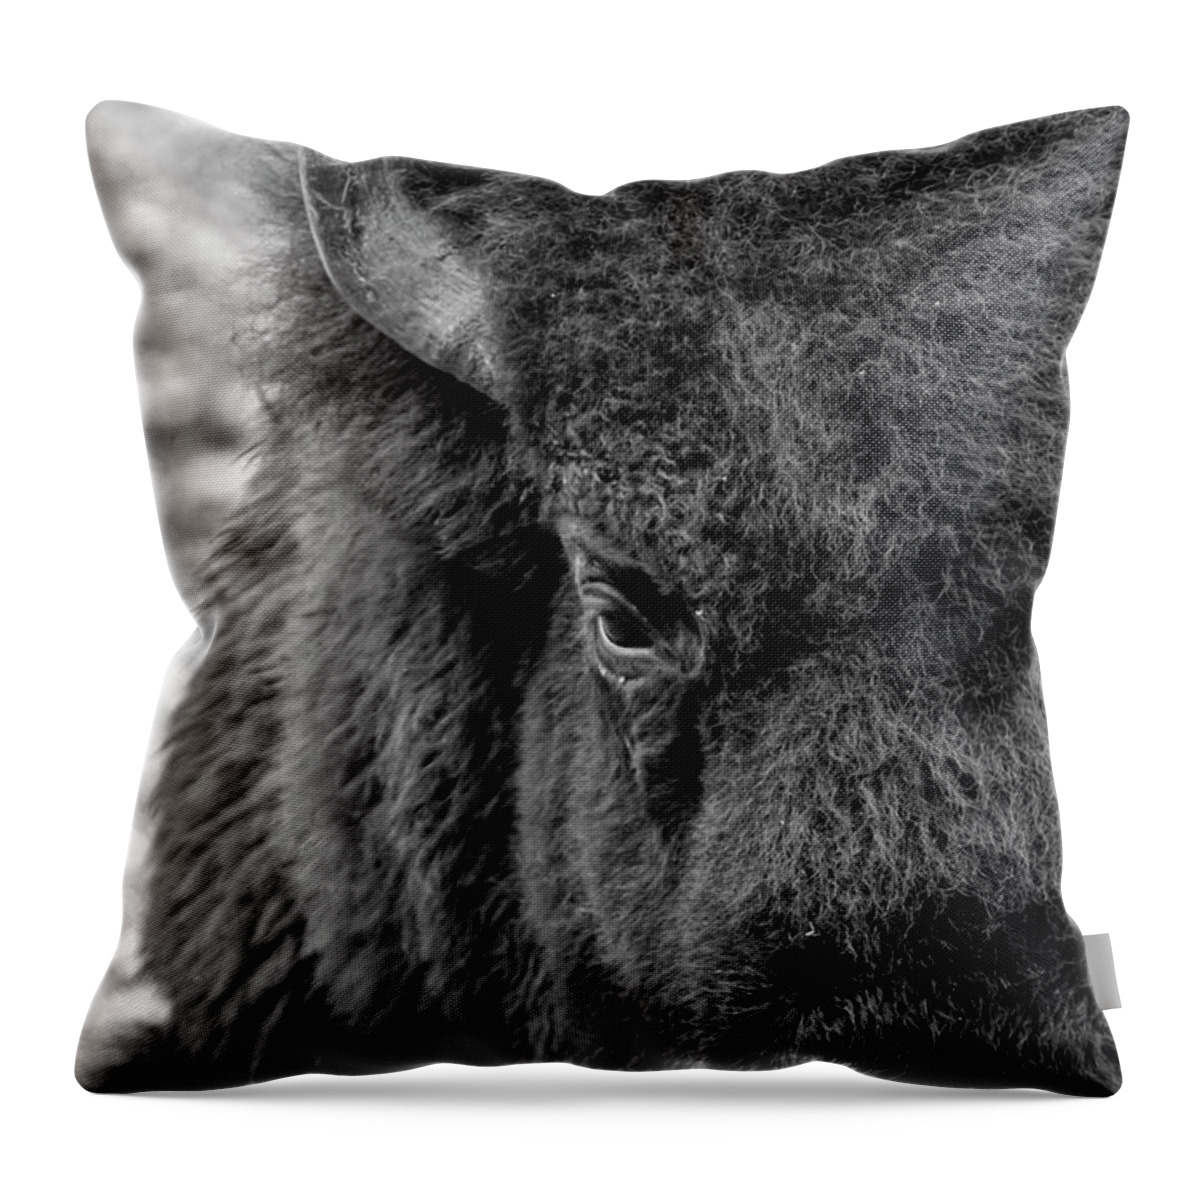 Bison Throw Pillow featuring the photograph Bison by Holly Ross